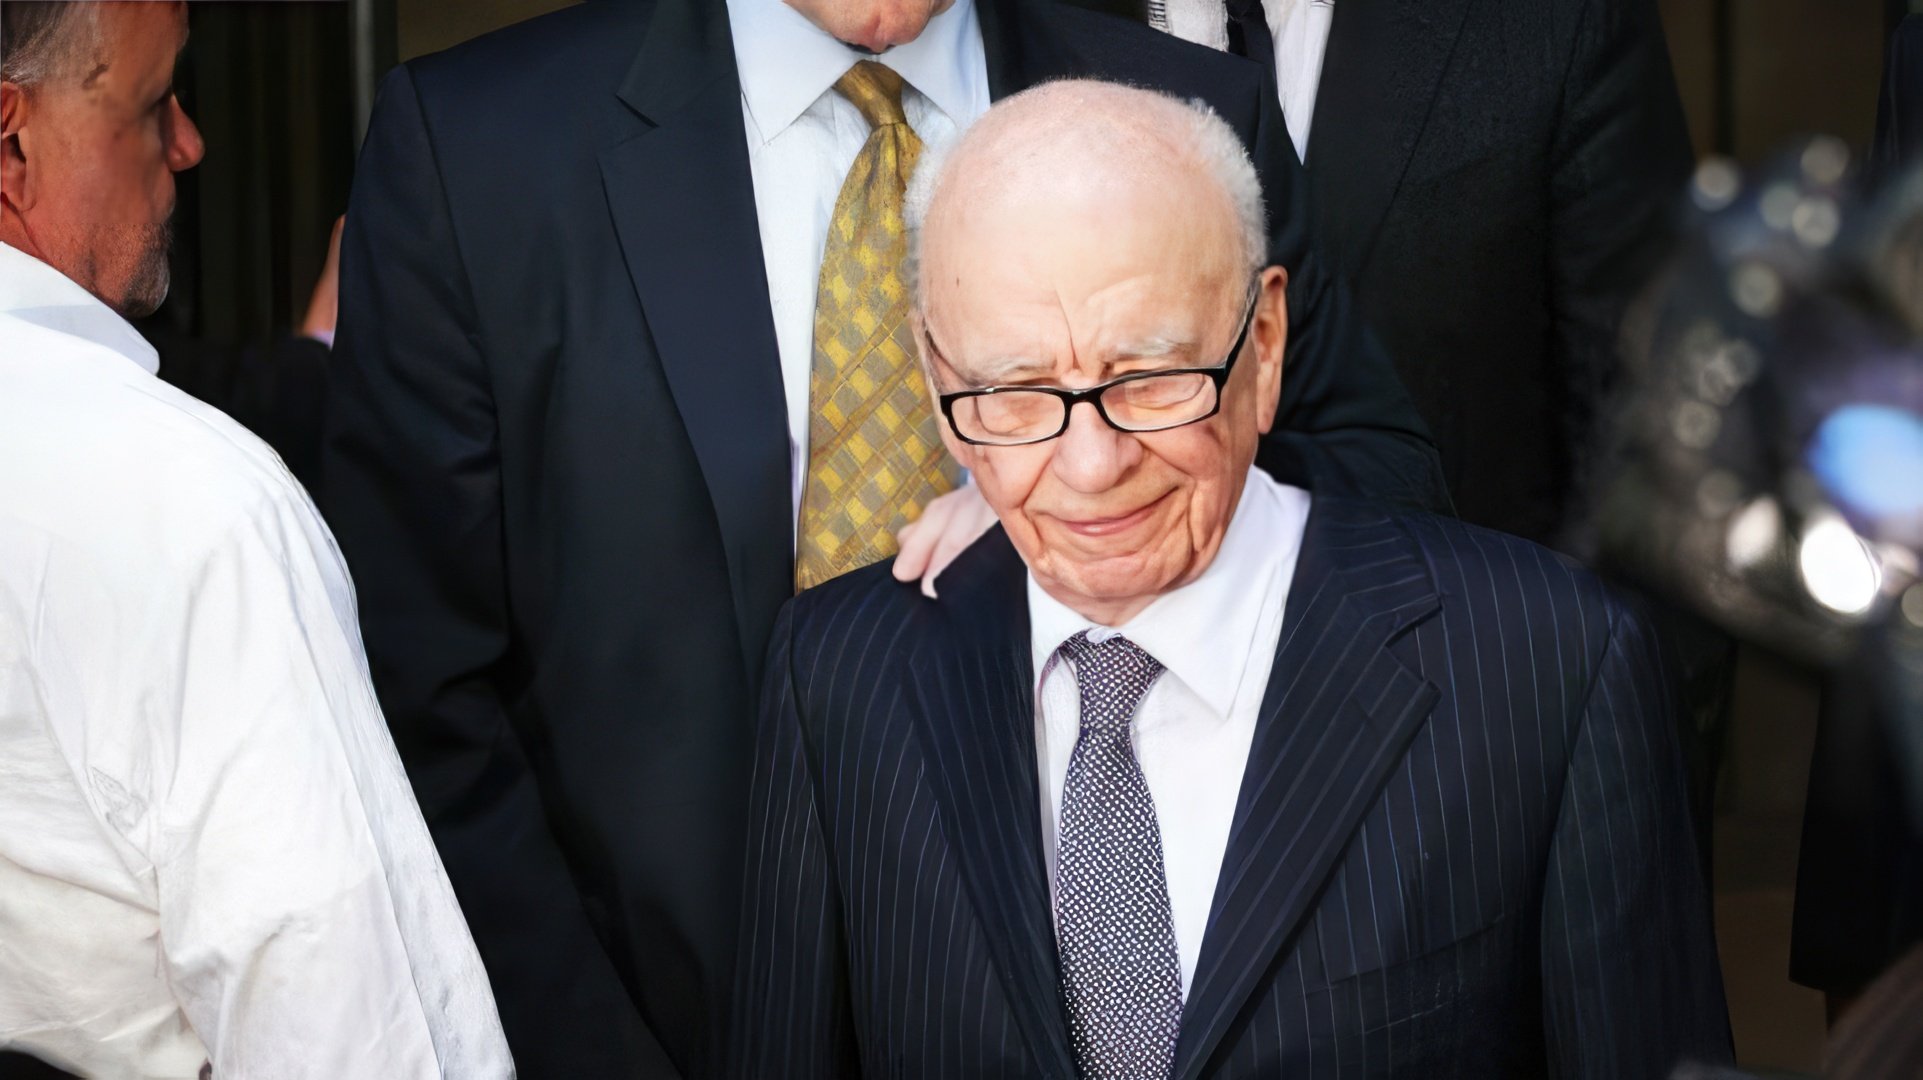 Rupert Murdoch lost the court case and was accused of illegally wiretapping the actress